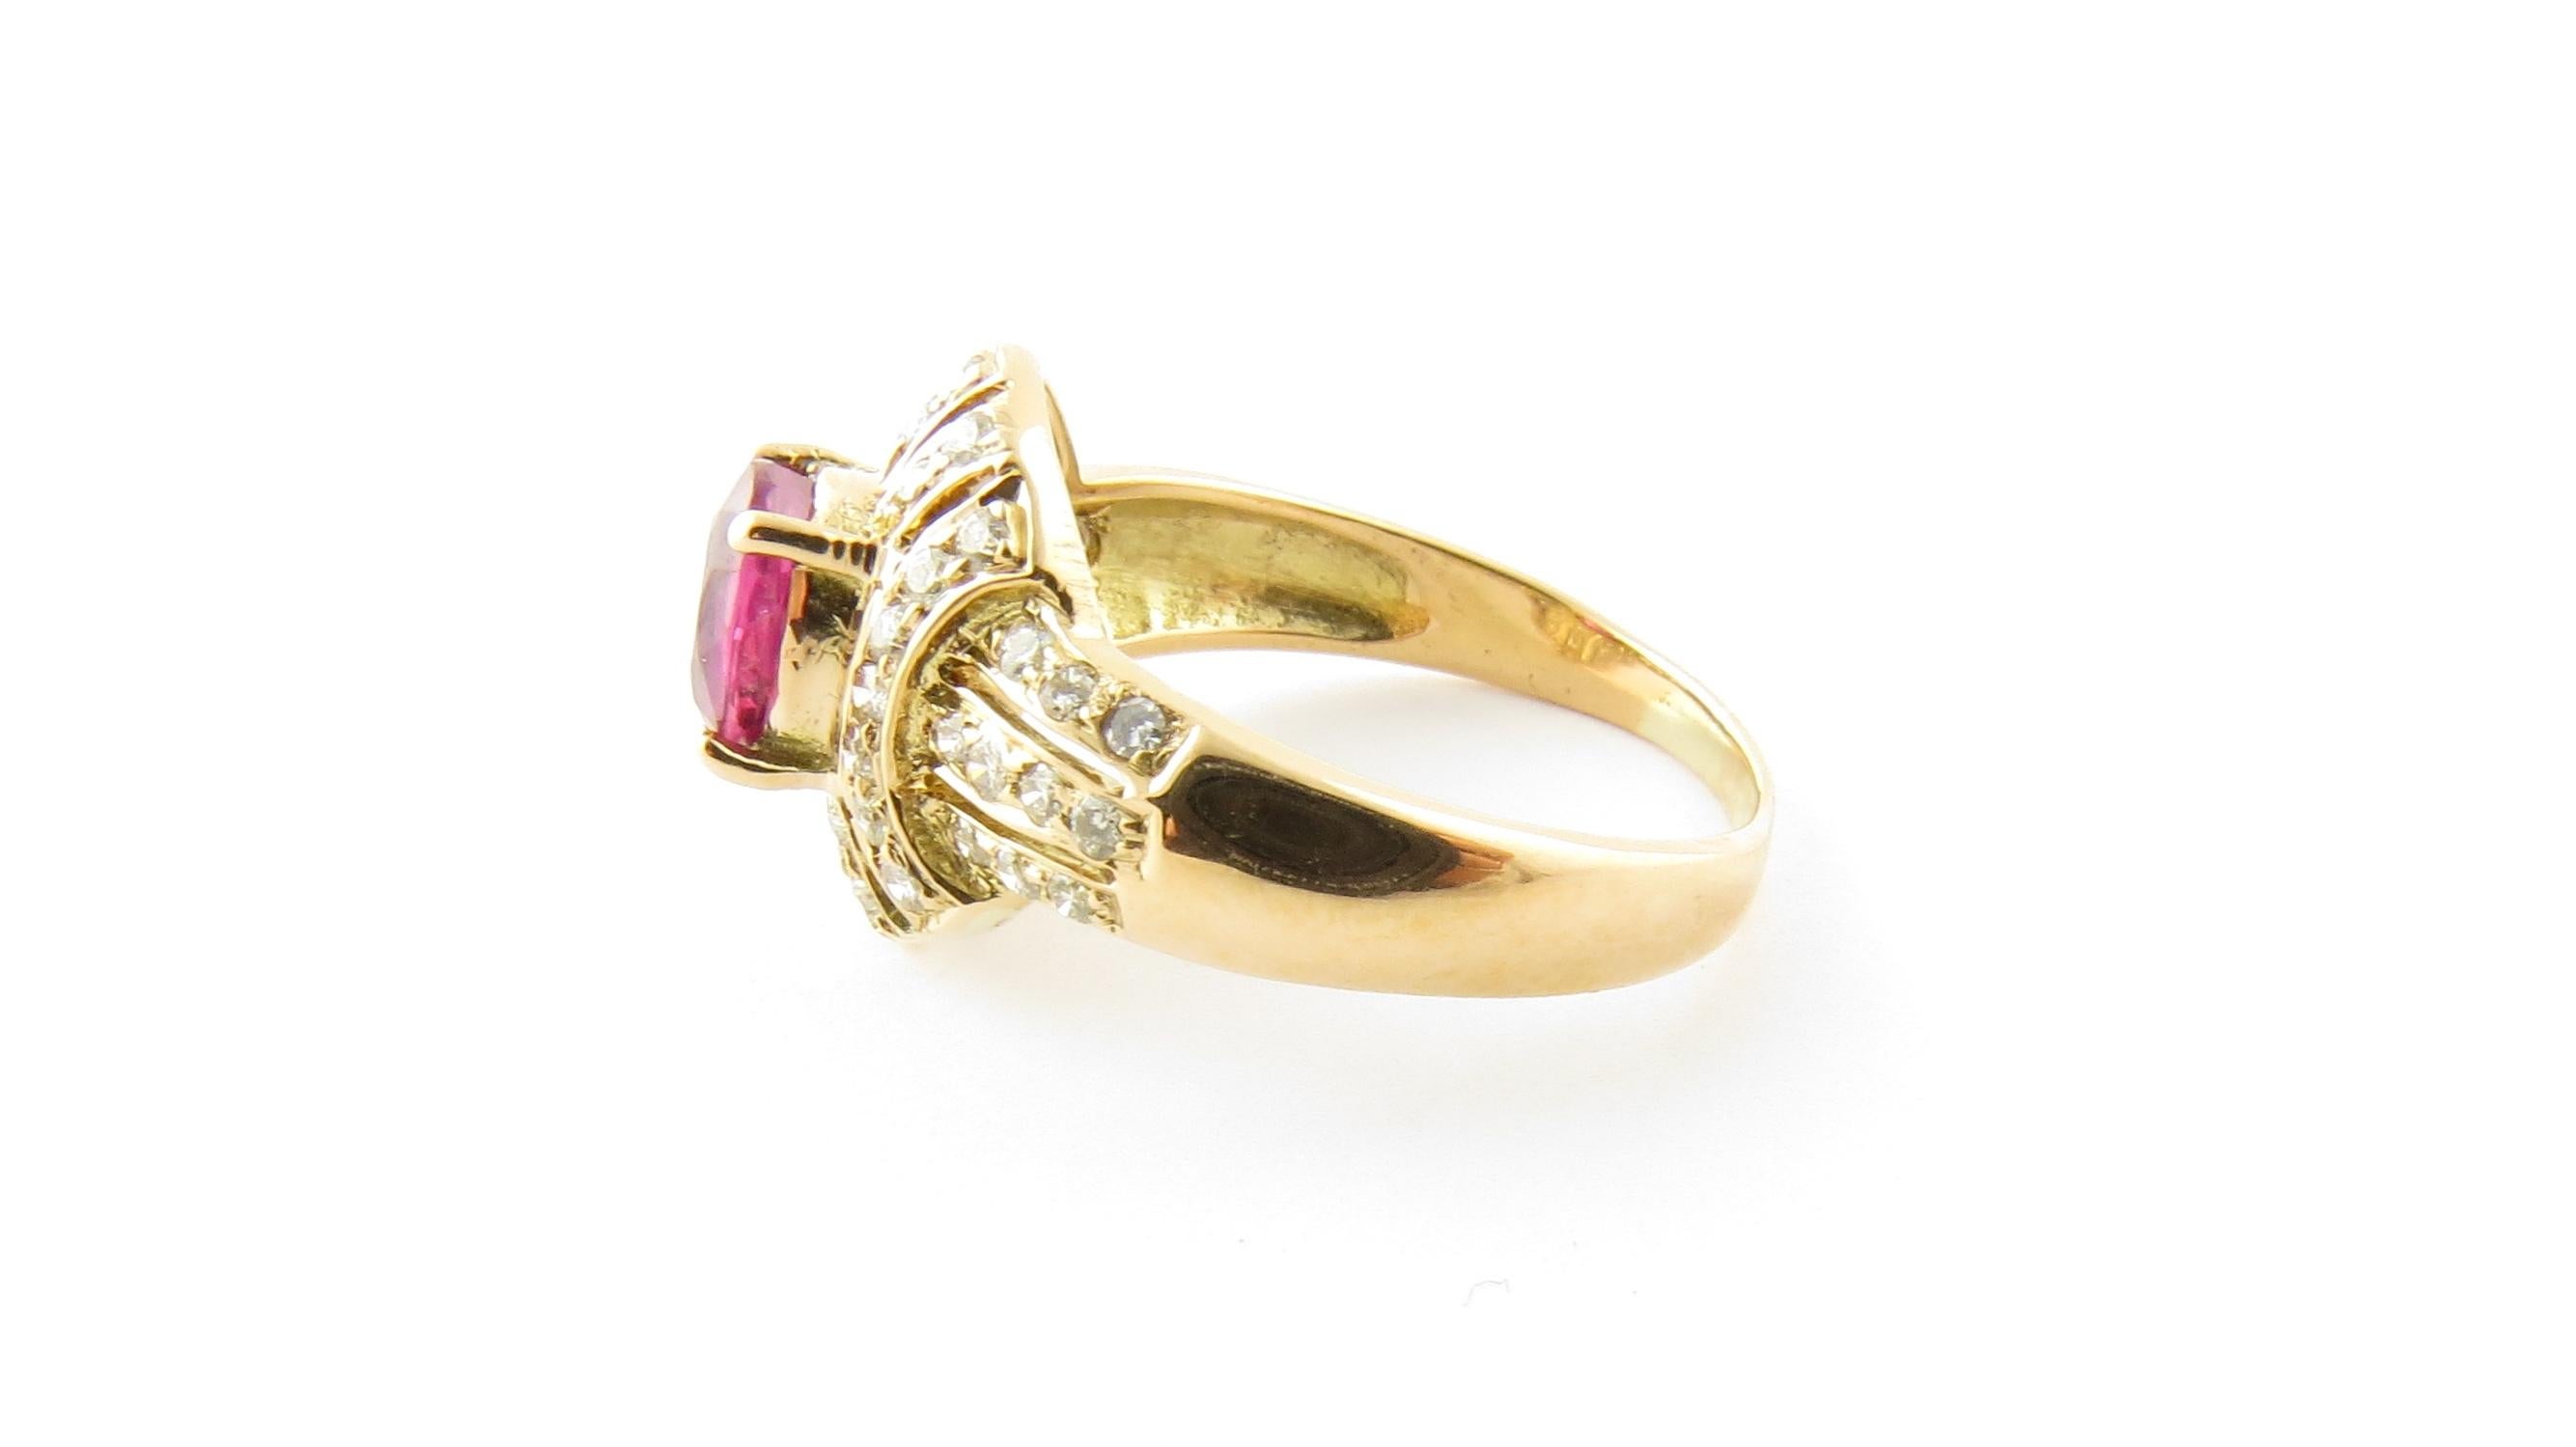 Vintage 18 Karat Yellow Gold Ruby and Diamond Ring Size 6.5

This elegant ring features one oval ruby (7 mm x 5 mm) surrounded by 45 round brilliant cut diamond and one round single cut diamond set in classic 18K yellow gold. Top of ring measures 13